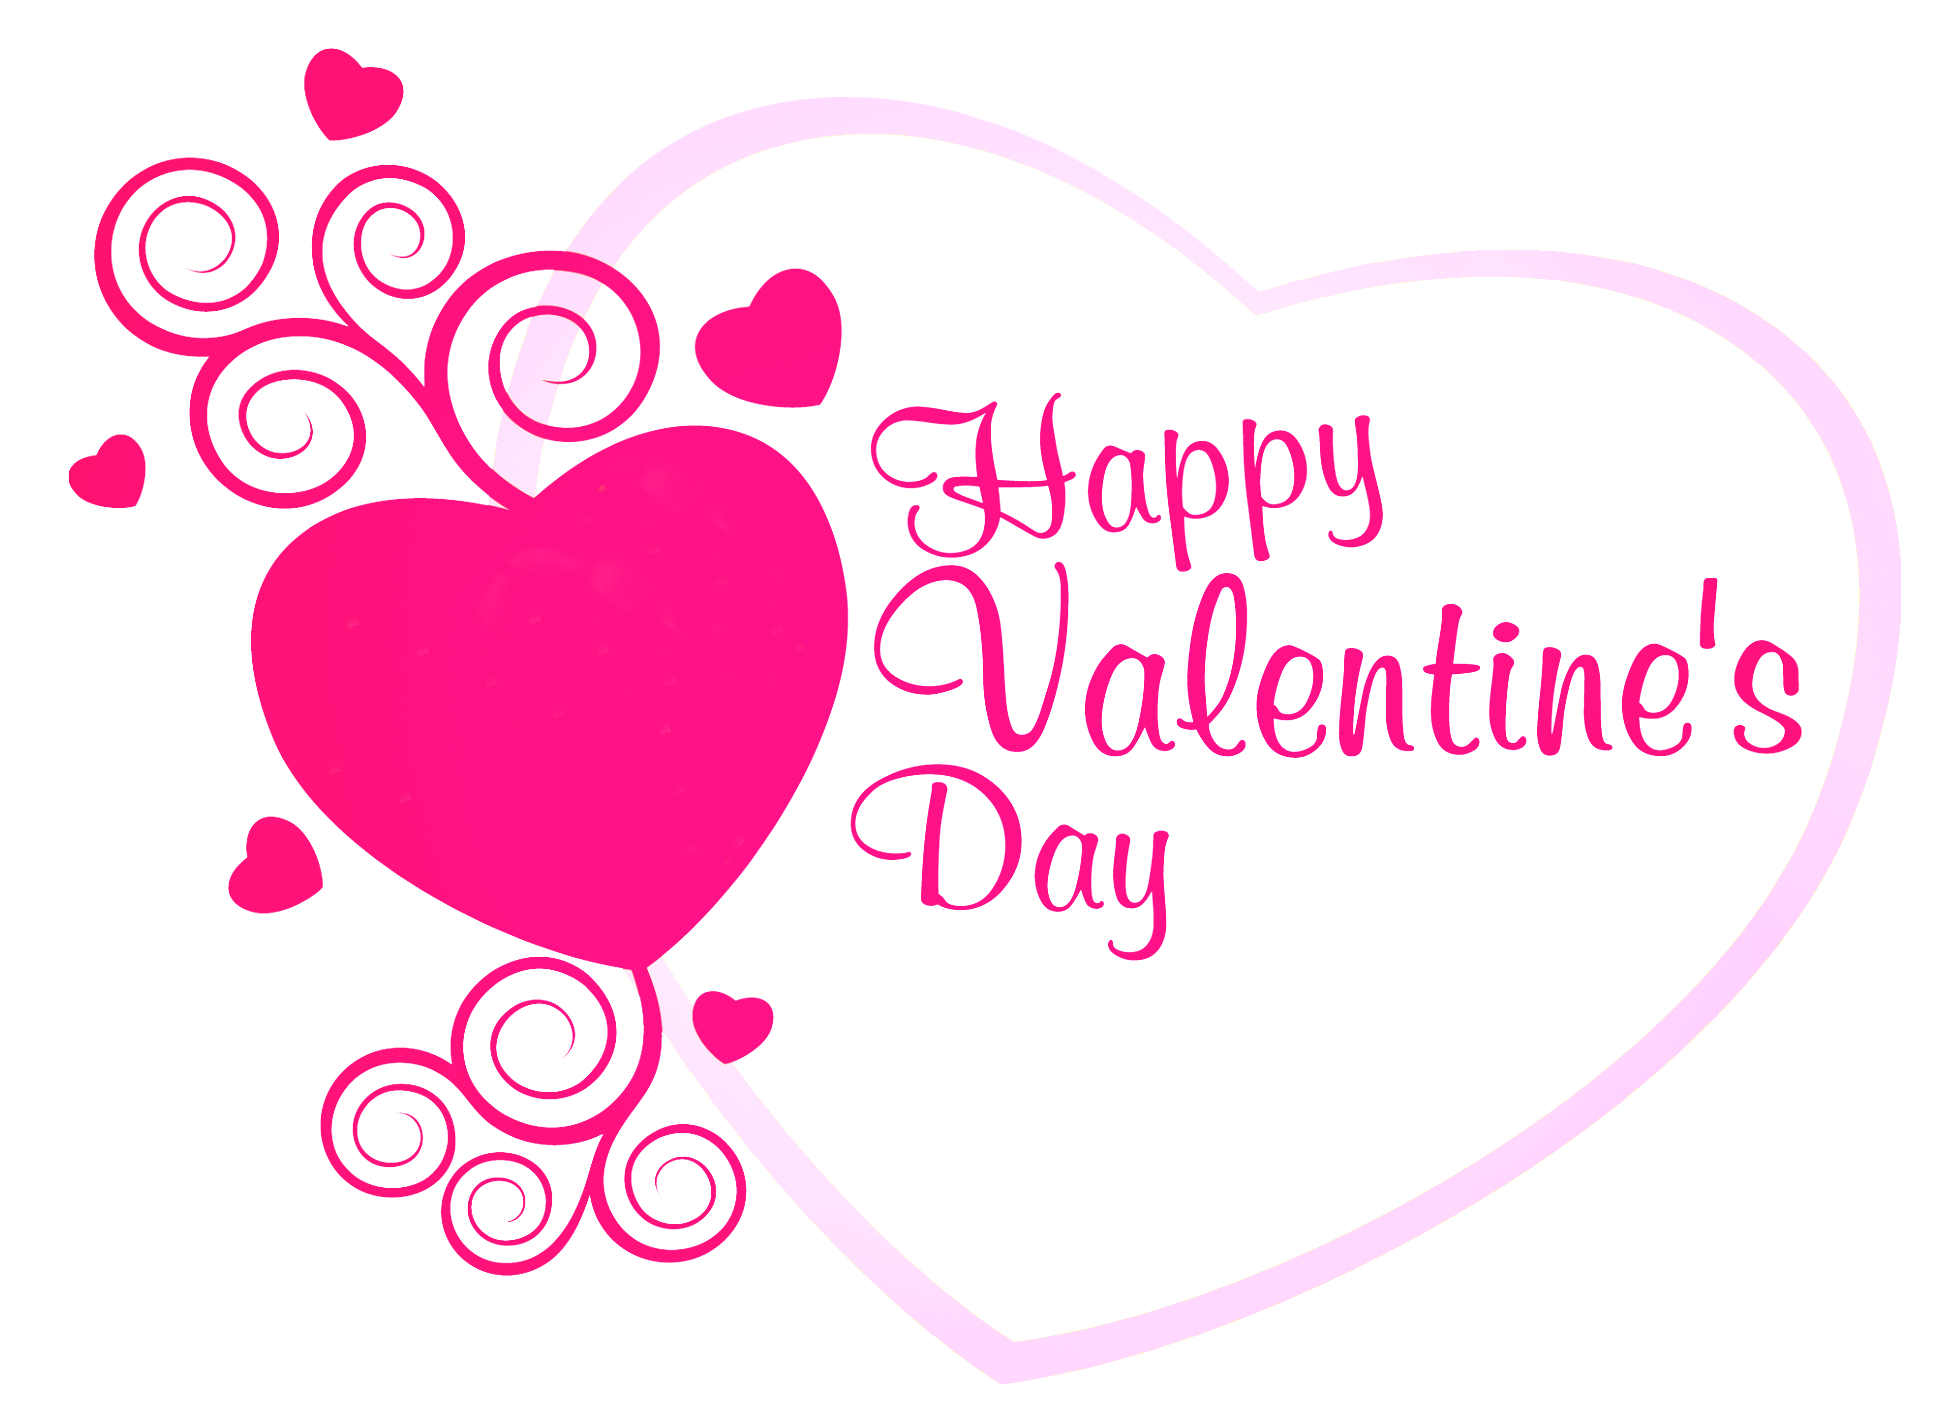 valentines day clipart transparent - Clipground